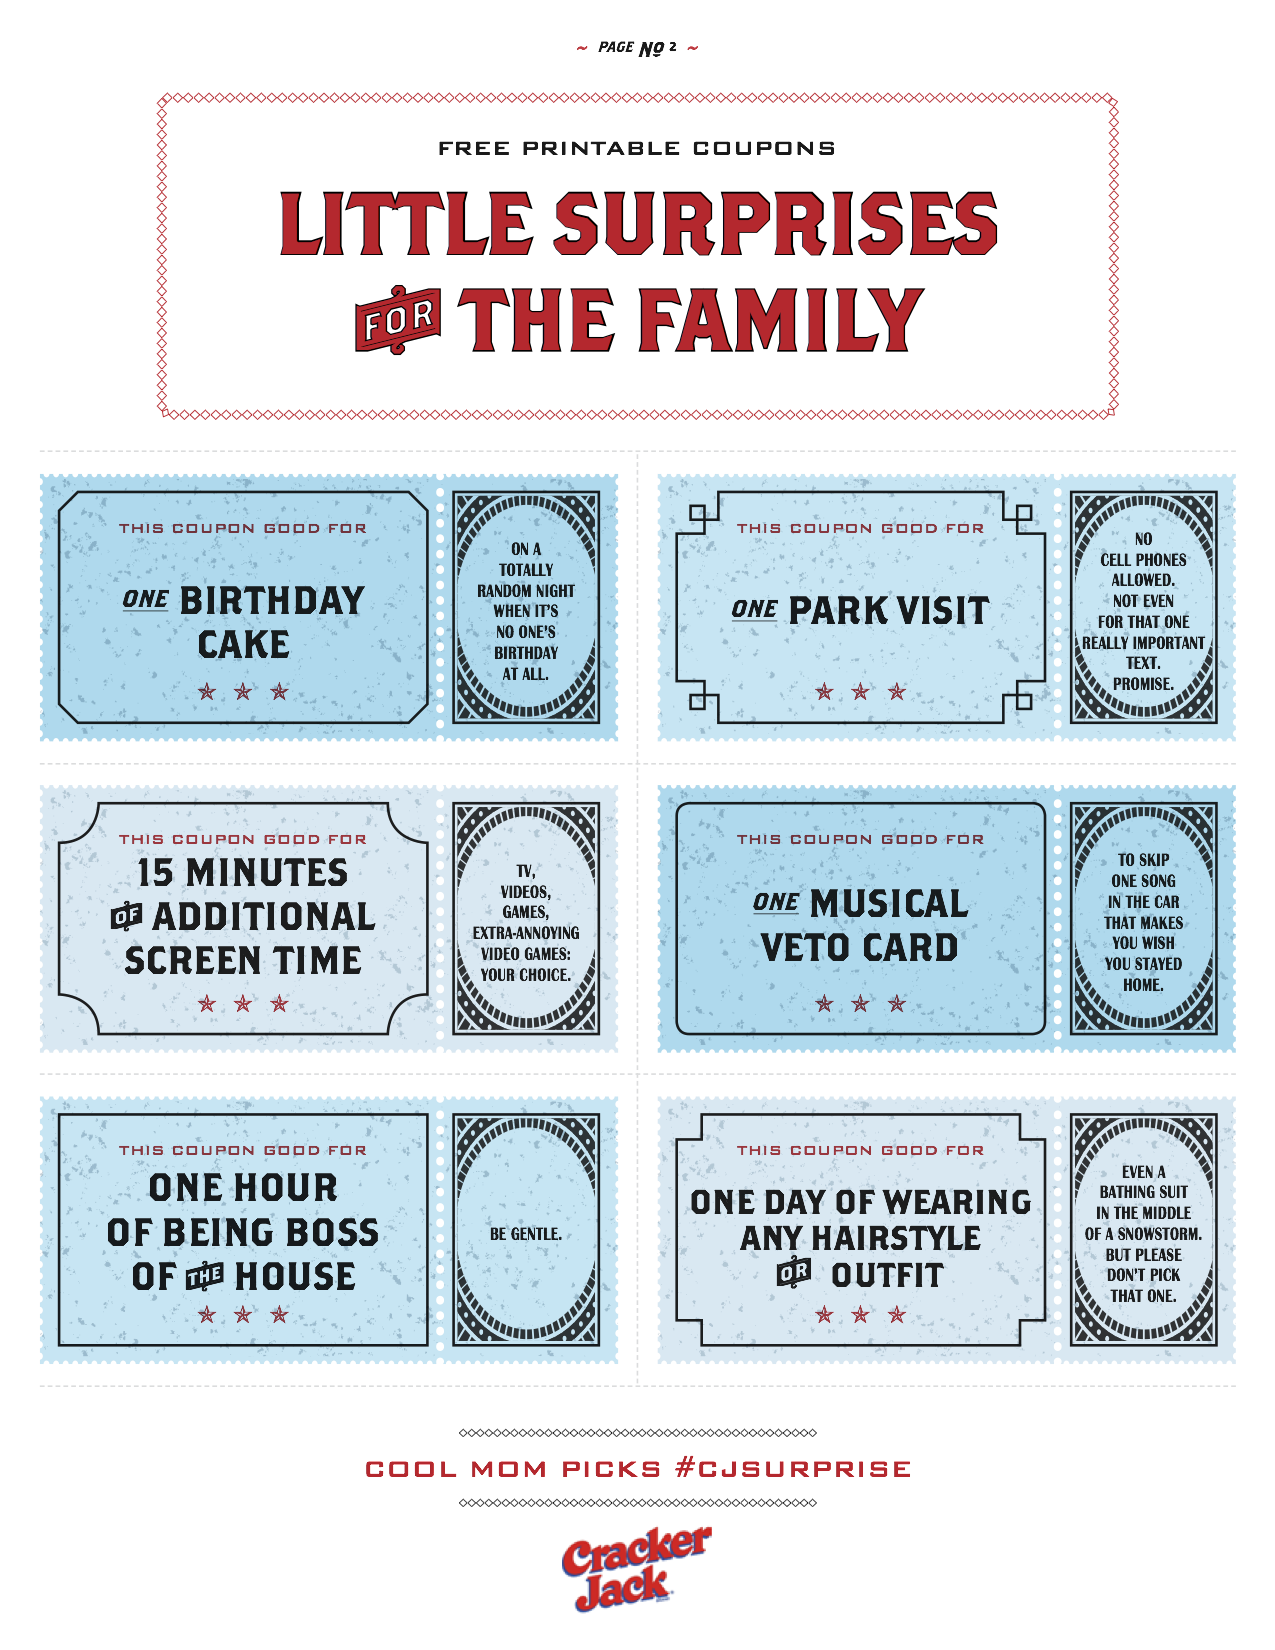 More Free Printable Coupons For Family Surprises You Ll Love